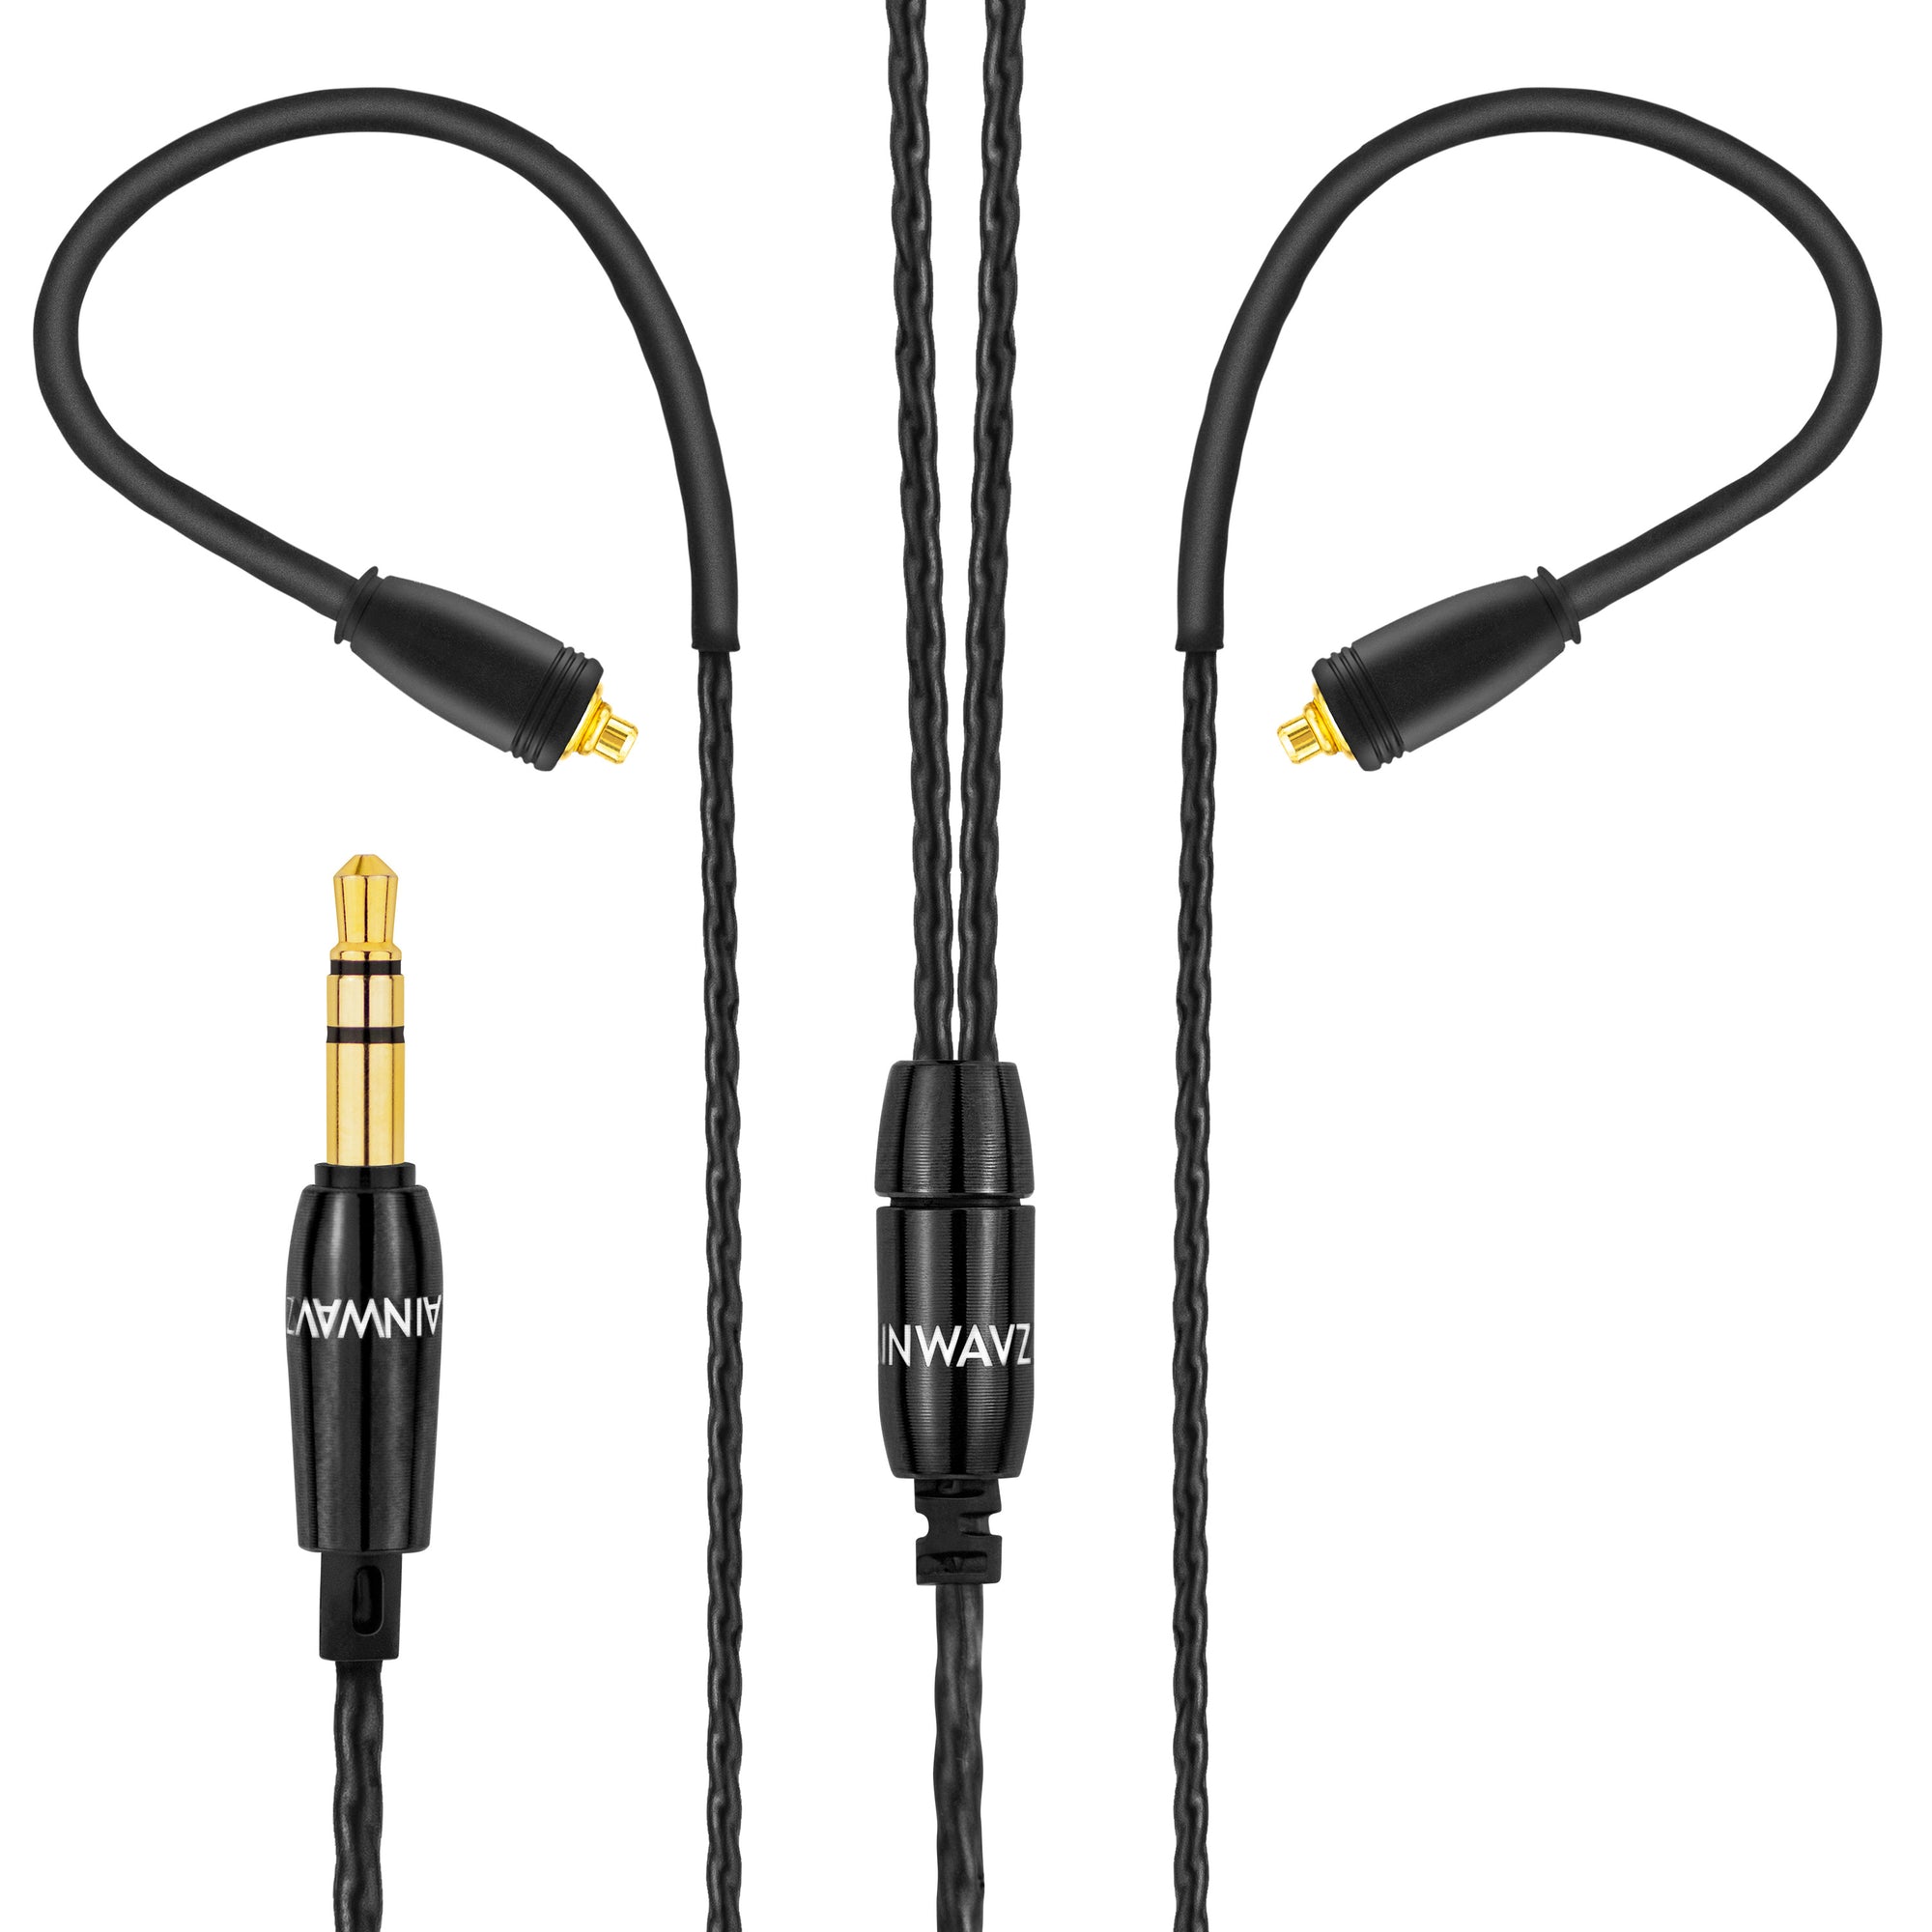 Earphone Cable with MMCX Connector (3.5mm Jack)